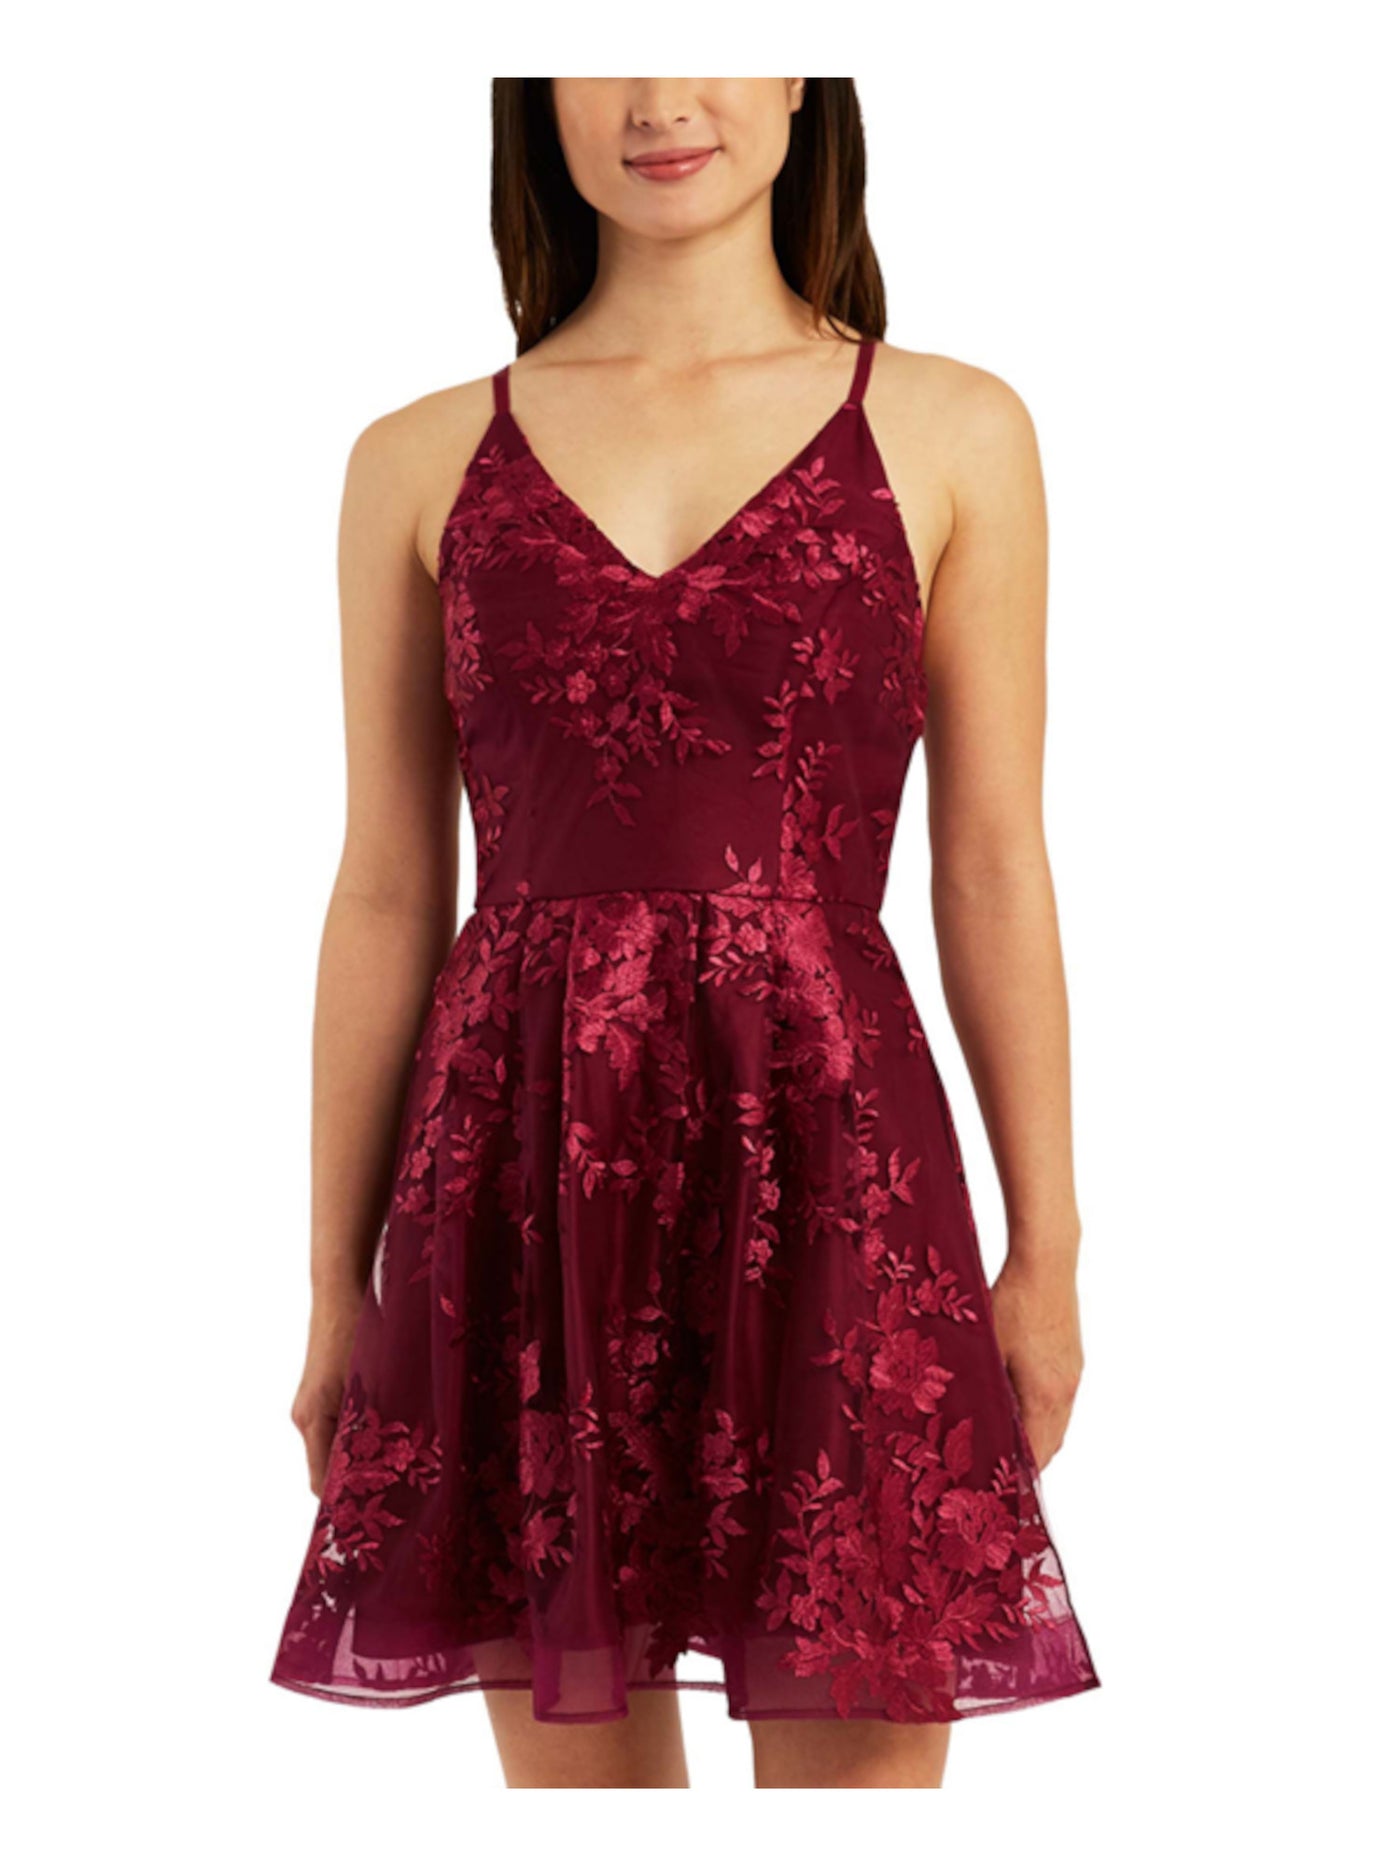 BCX DRESS Womens Burgundy Lined Adjustable Zippered Floral Sleeveless V Neck Above The Knee Party Fit + Flare Dress Juniors 5